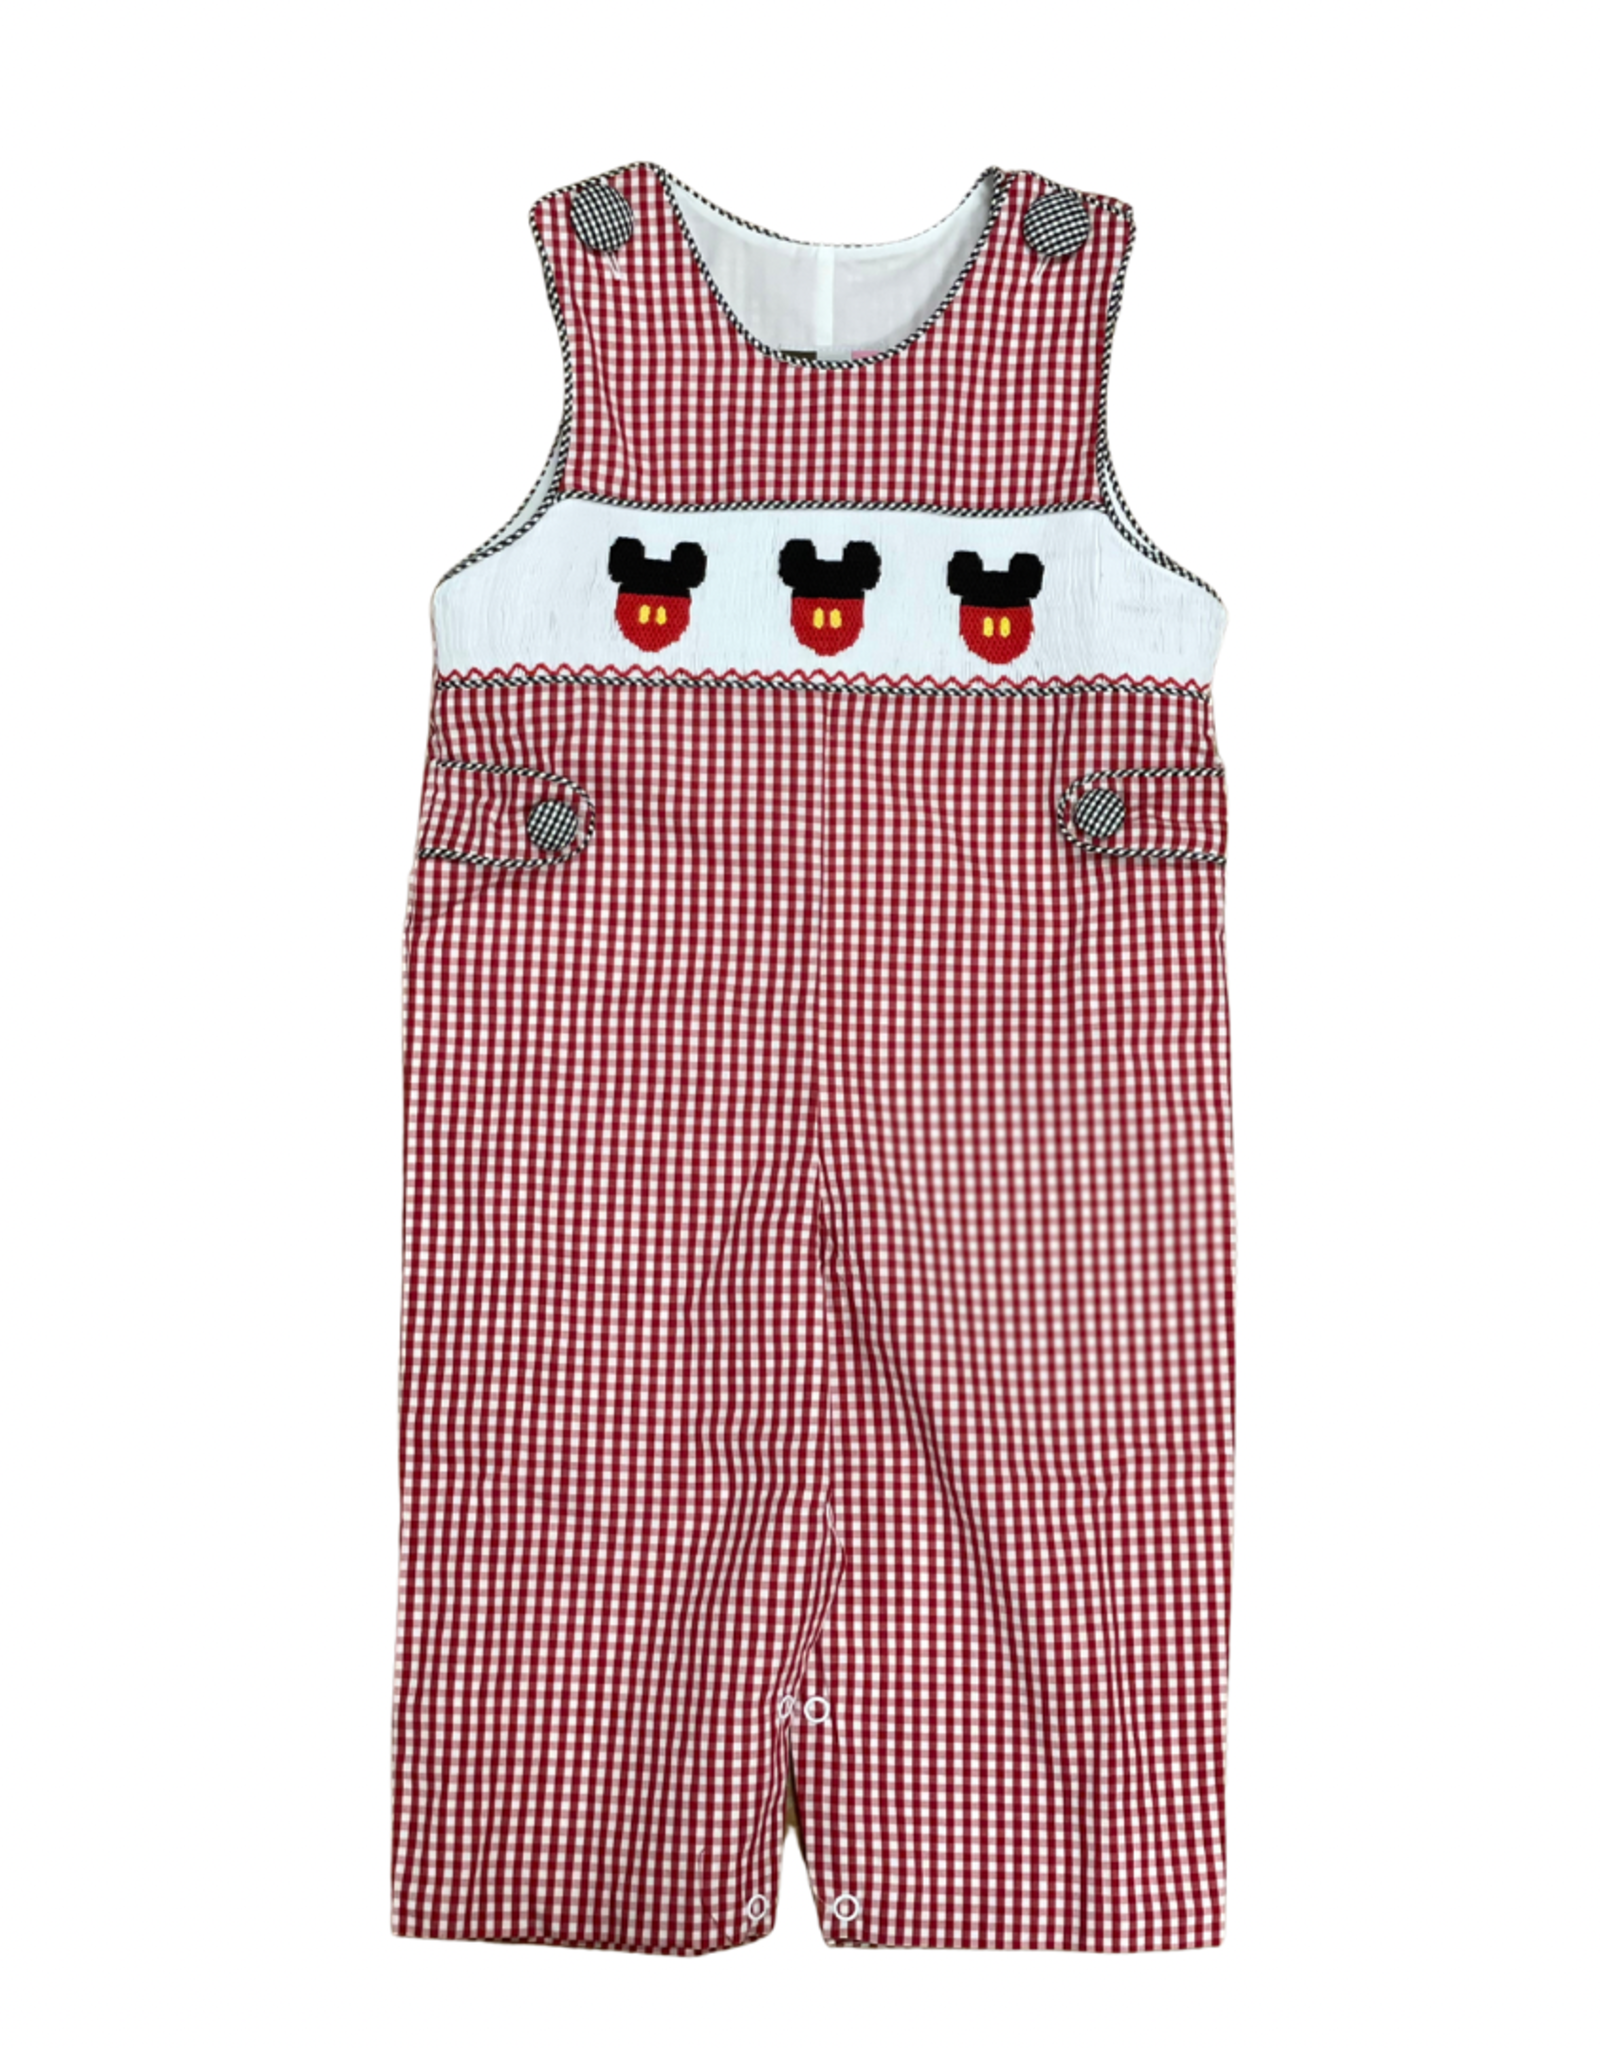 Mouse Ears Smocked Boys Longall